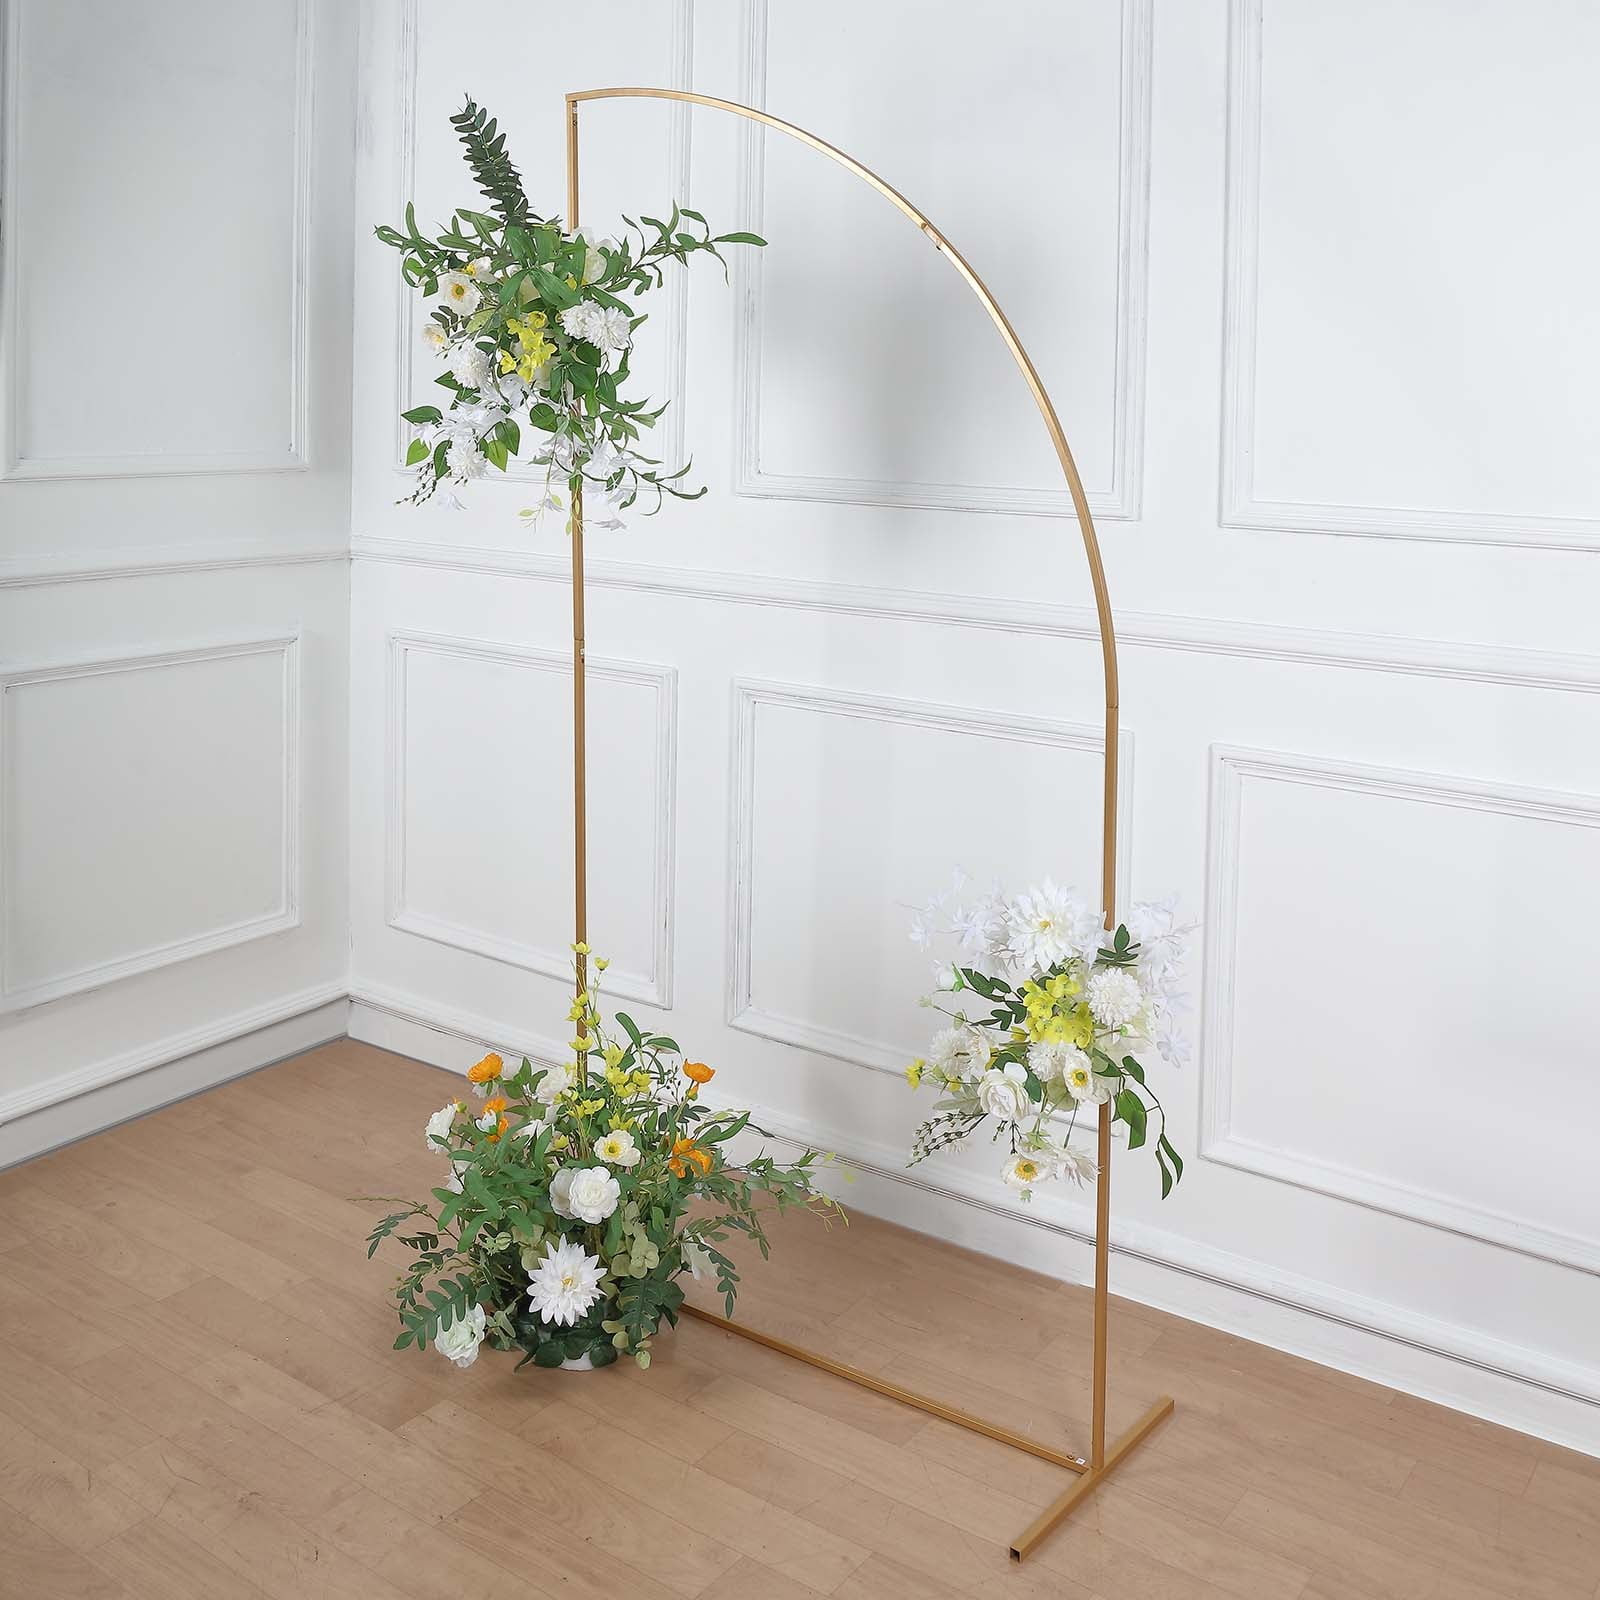 Lofaris 1X3.2Ft Gold Metal Wedding Floral Stand | Wedding Arch Decorations | Wooden Wedding Arch for Decorations | Circle Wedding Arch Decor